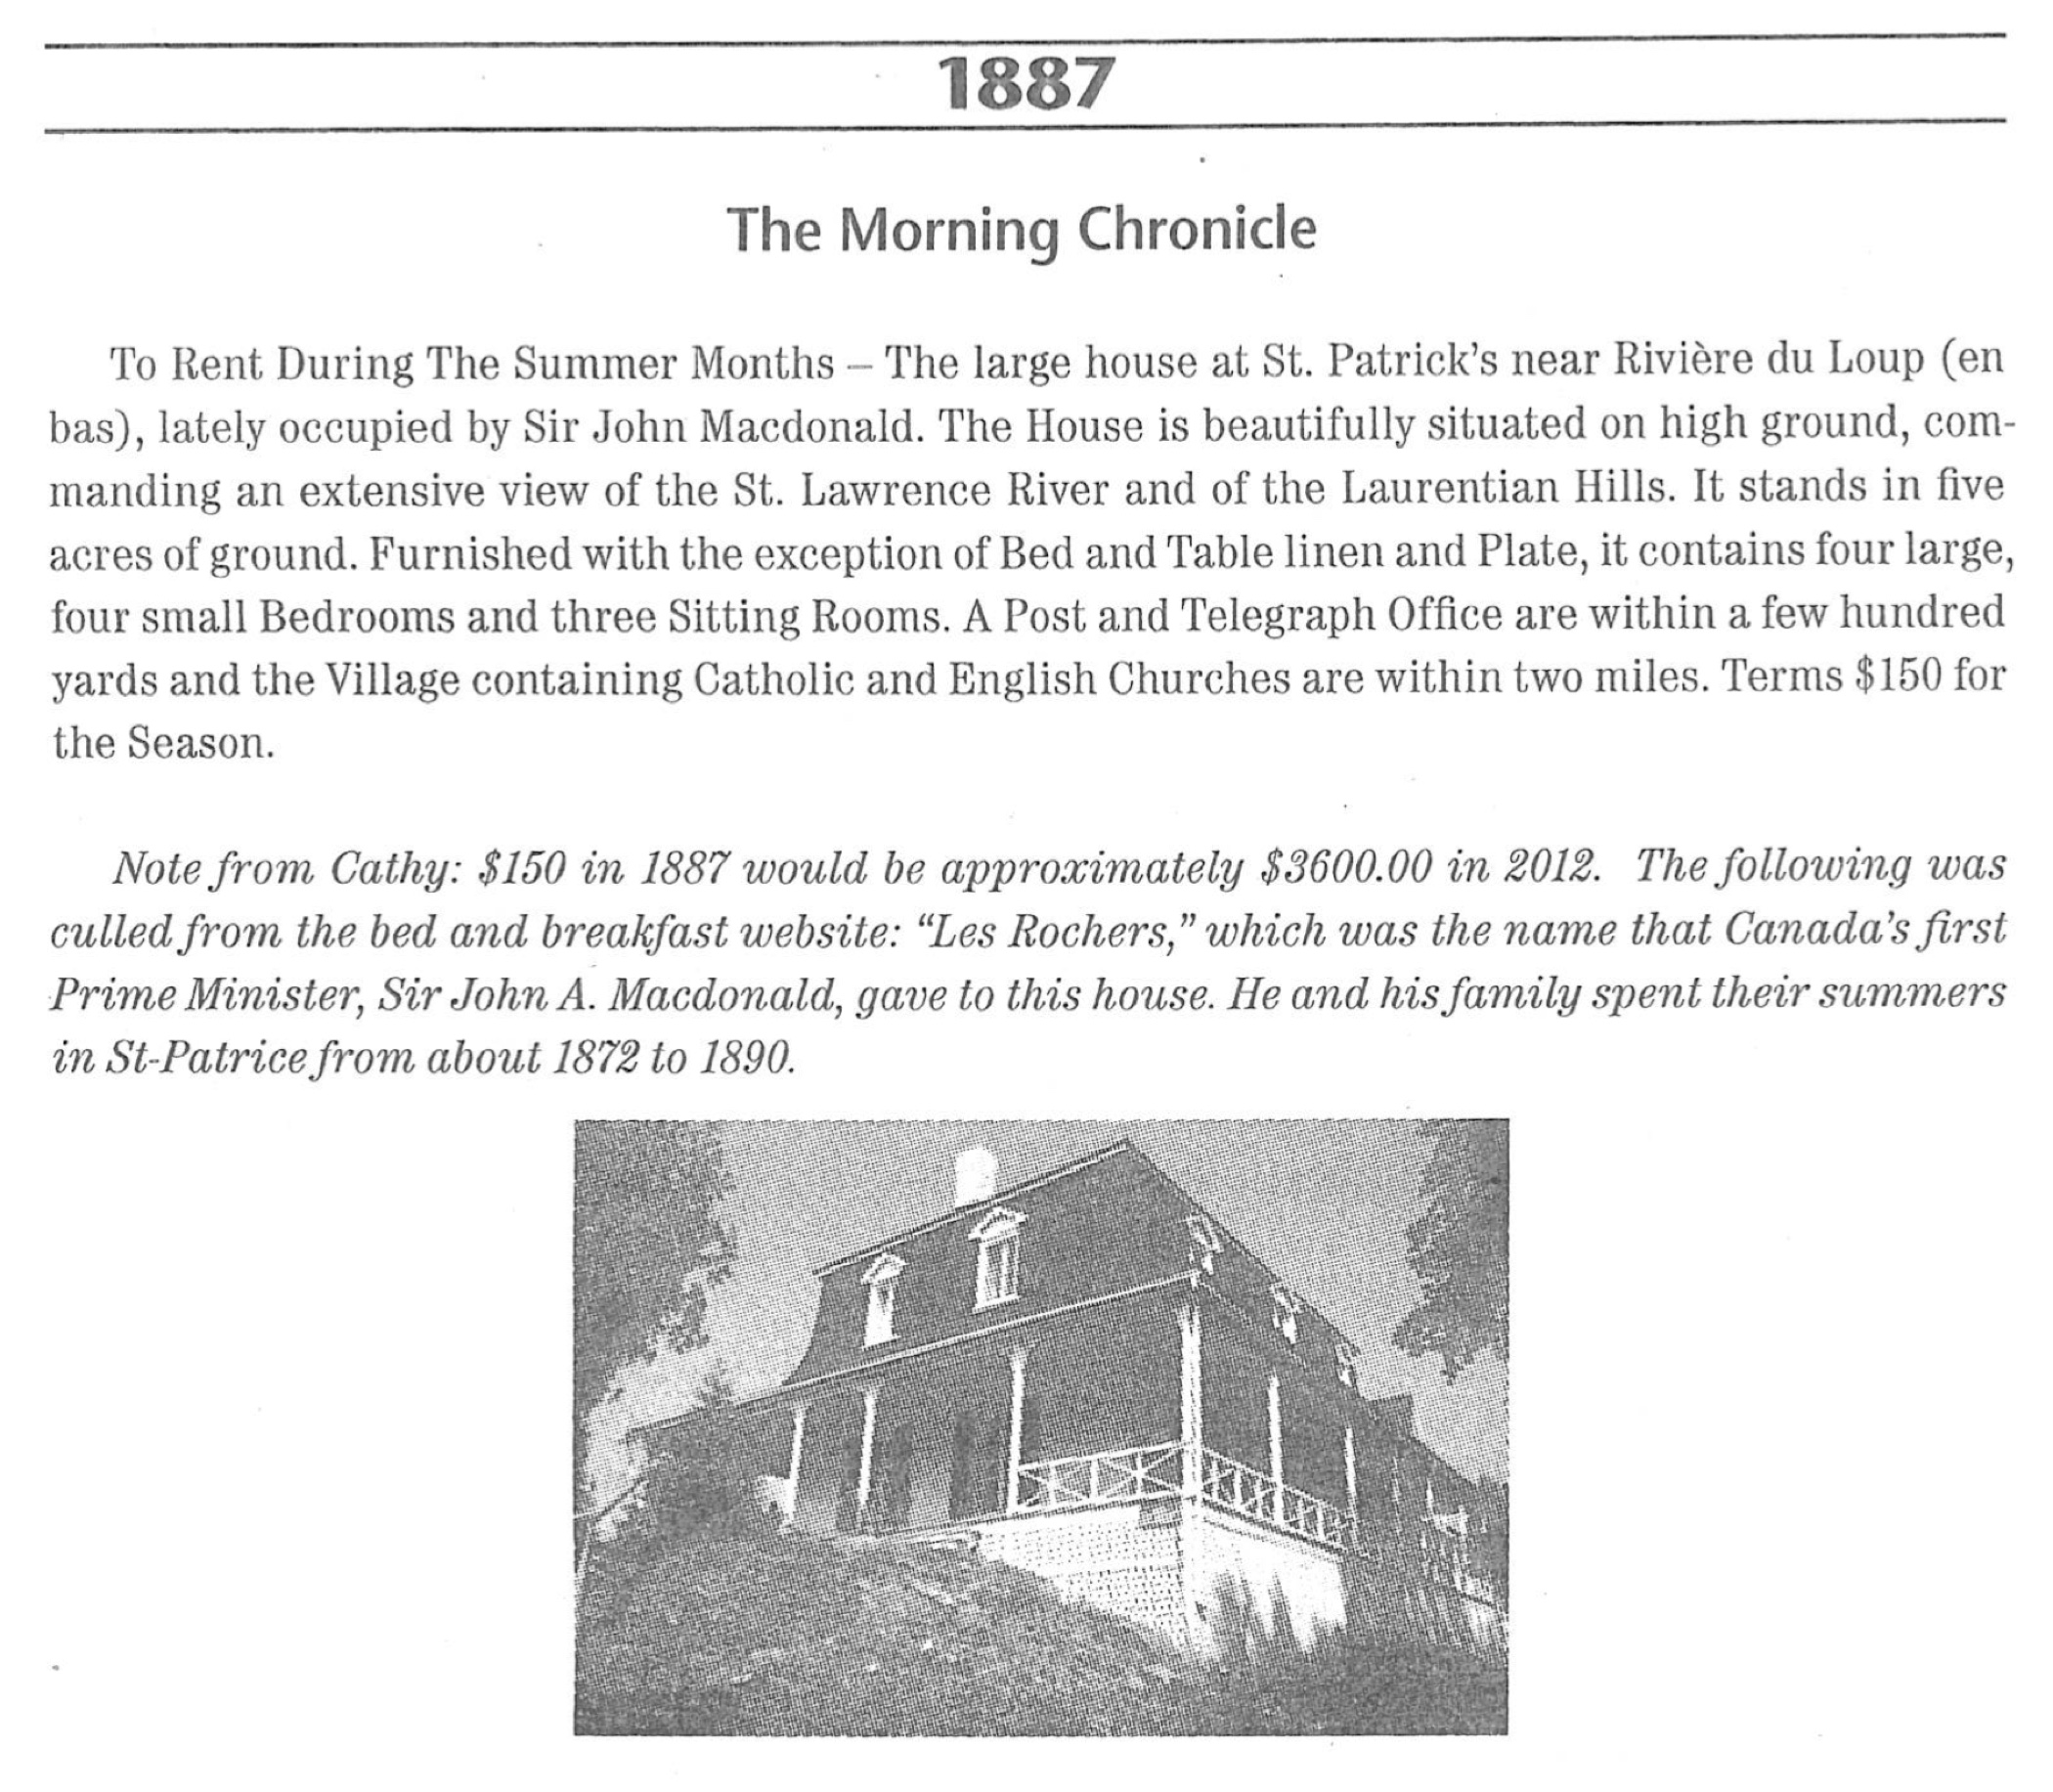 A photocopy of a listing in a newspaper (the Quebec Morning Chronicle) advertising a house for rent (Villa Les Rochers), with a photo of the house attached.